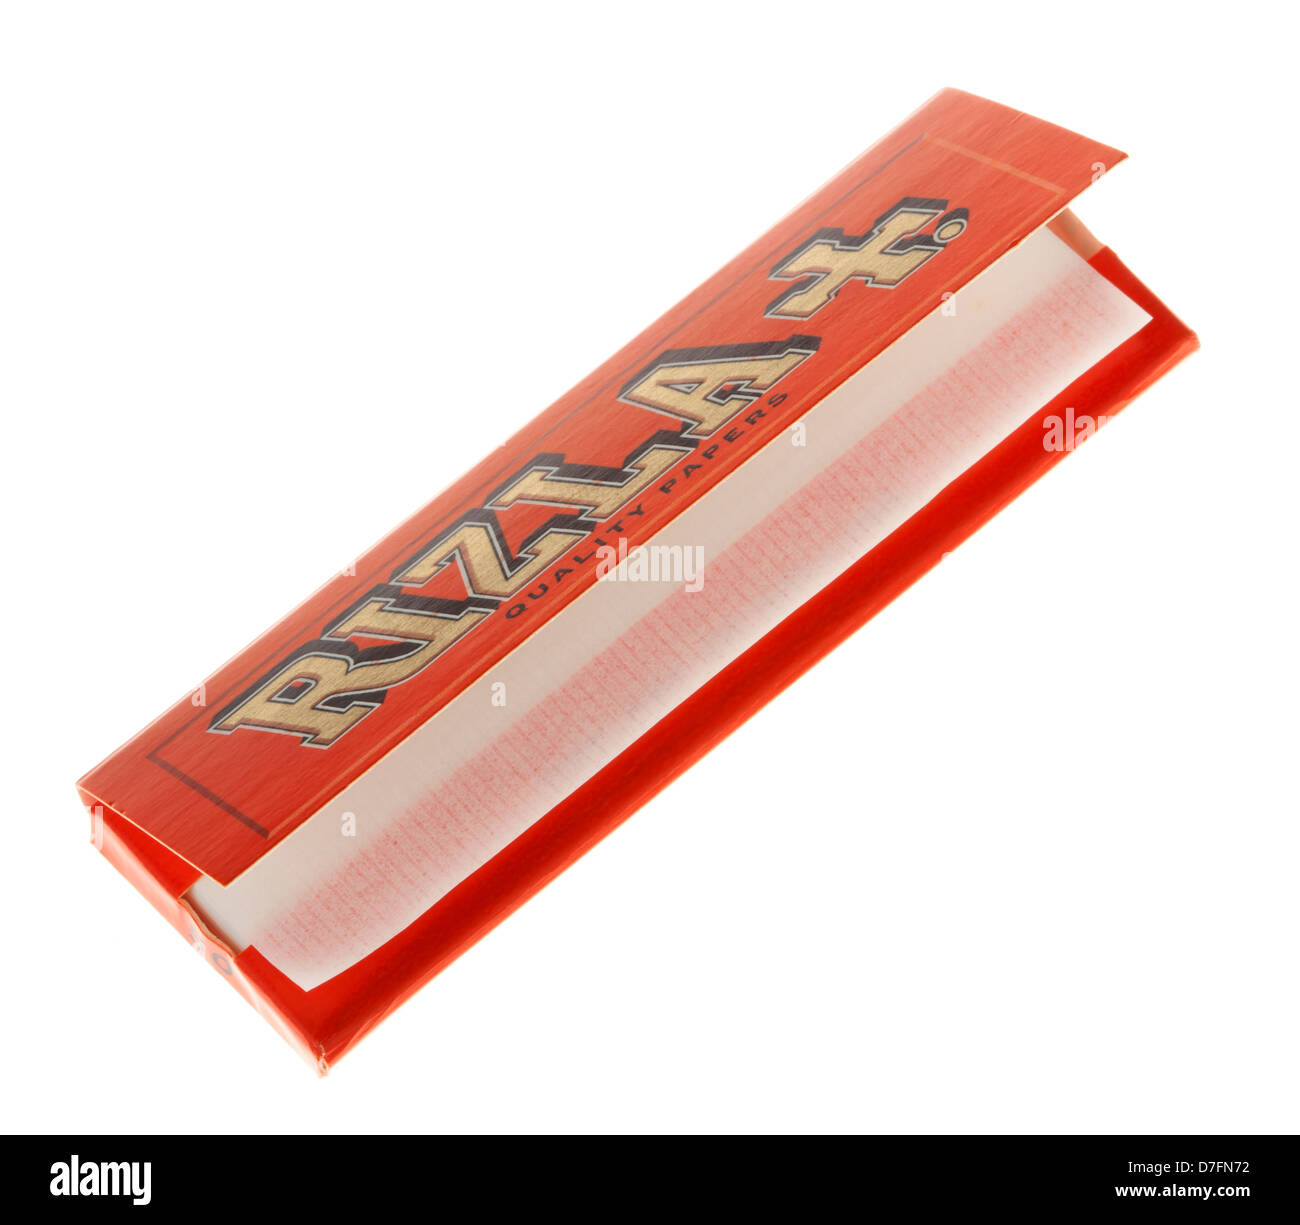 Tel-Aviv Israel - March 20th 2011: full pack Rizla rolling papers. This is orange pack short papers which contains thickest Stock Photo